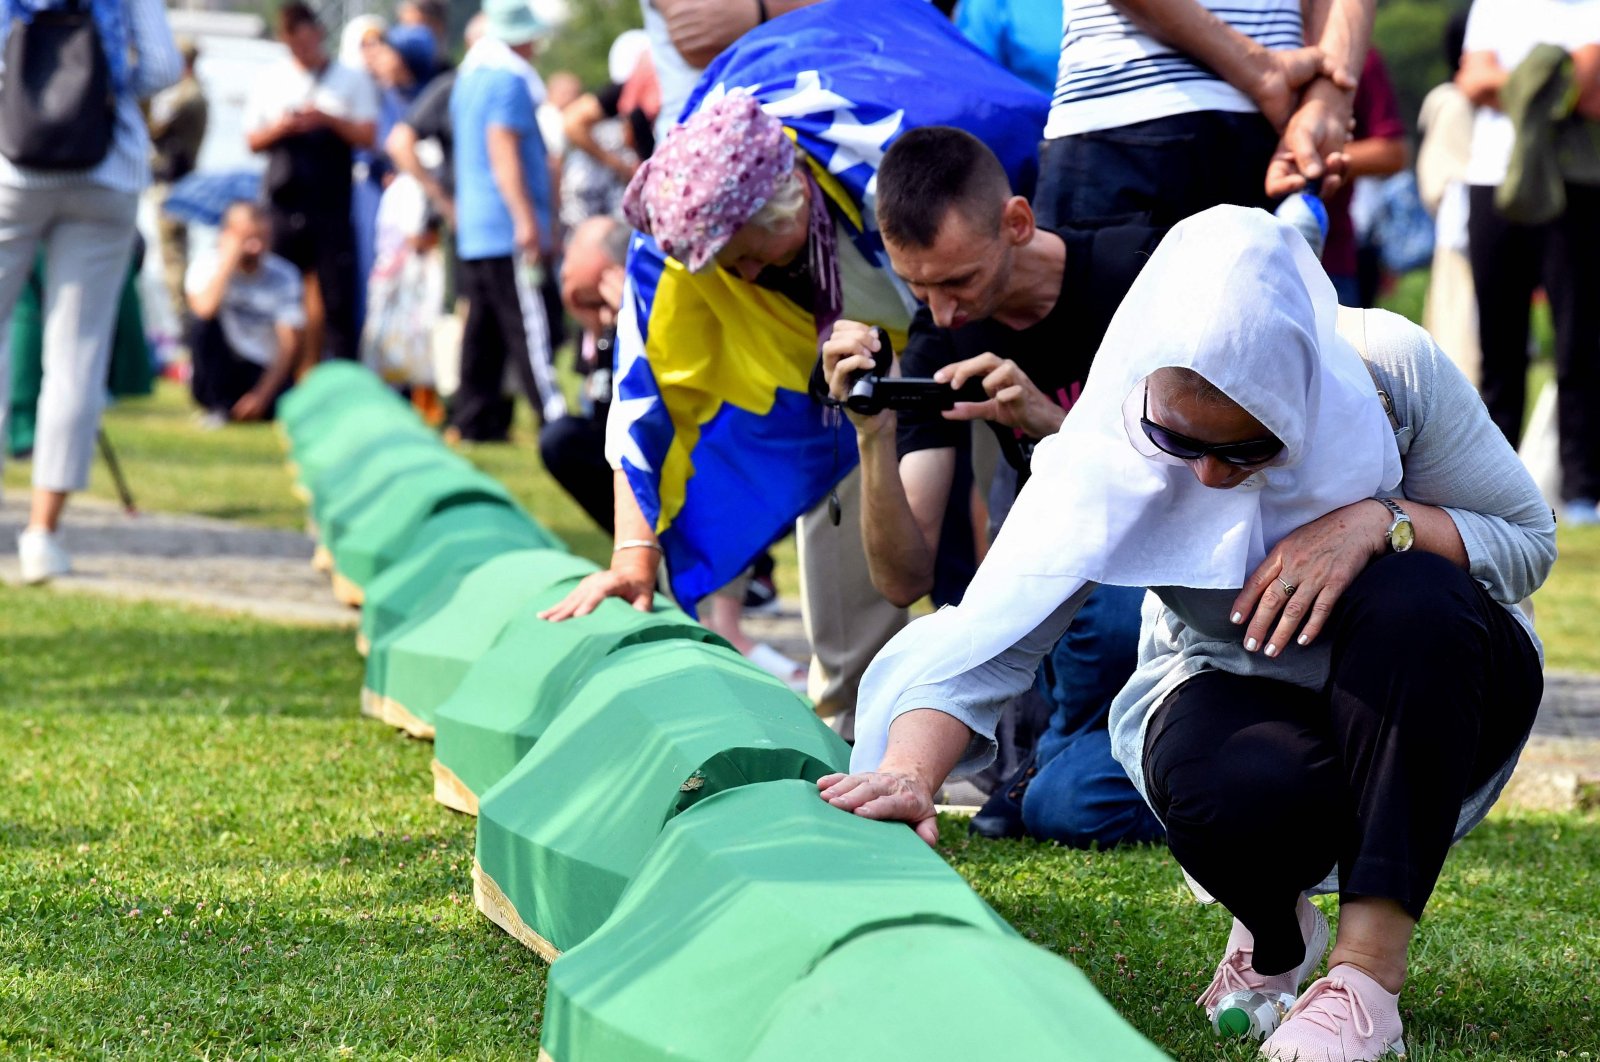 A Bosnian Muslim woman, survivor of the Srebrenica 1995 massacre mourns near the casket containing the remains of a relative and victim of the Srebrenica 1995 massacre, at the memorial cemetery in the village of Potocari, near Eastern-Bosnian town of Srebrenica, on July 11, 2023. (AFP Photo)